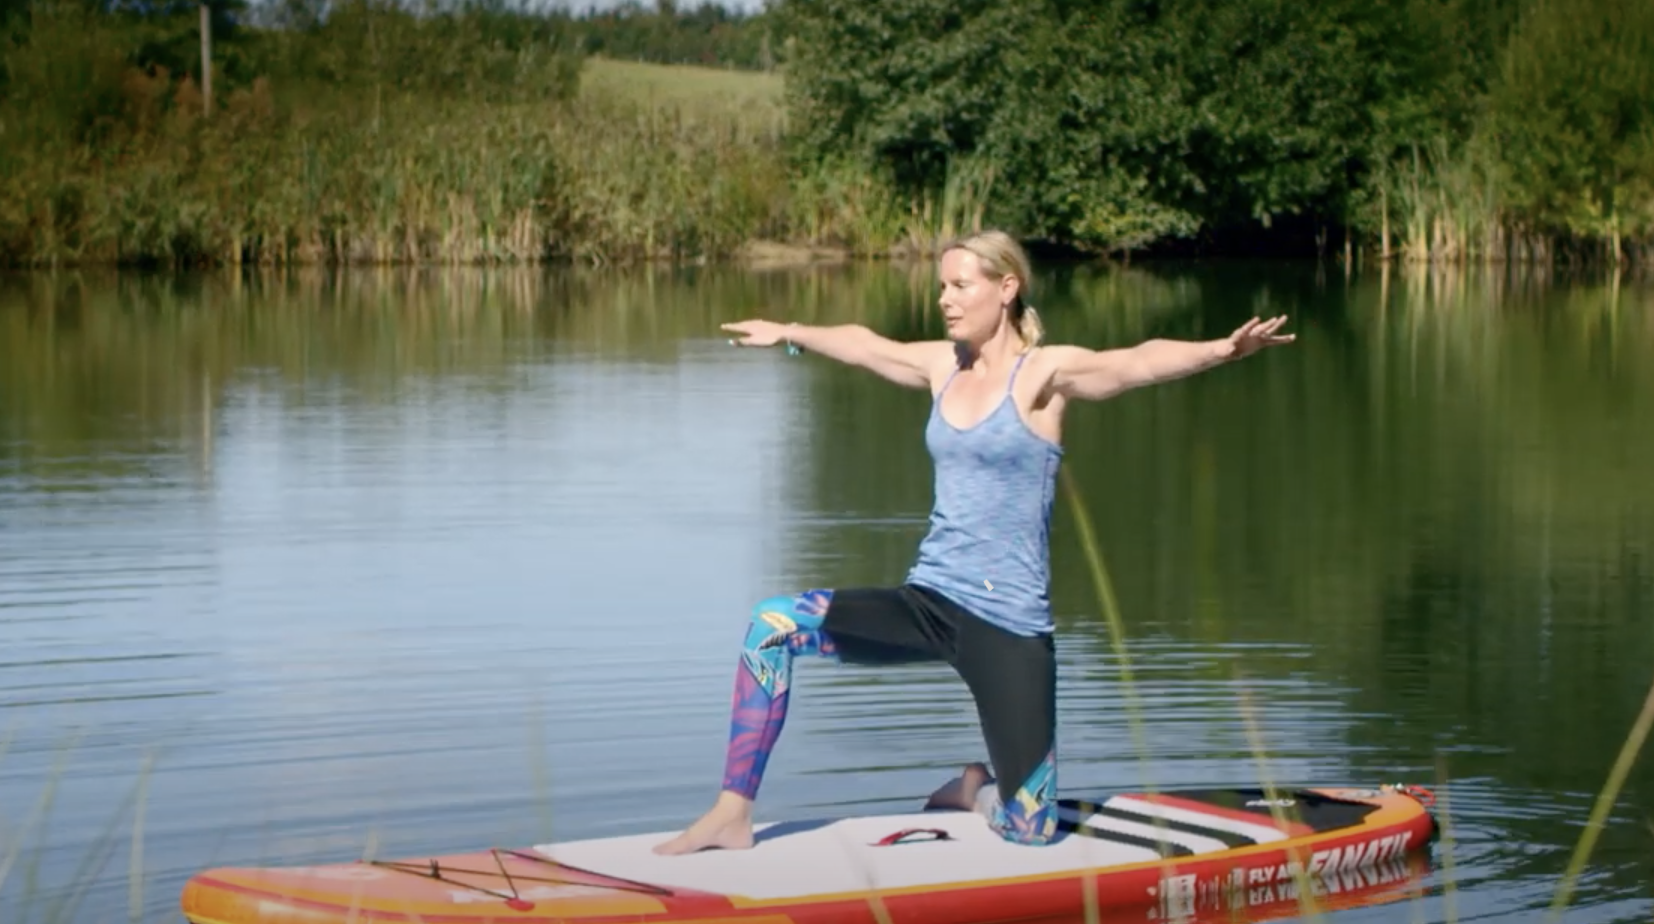 SUP Yoga Beginner Sequence